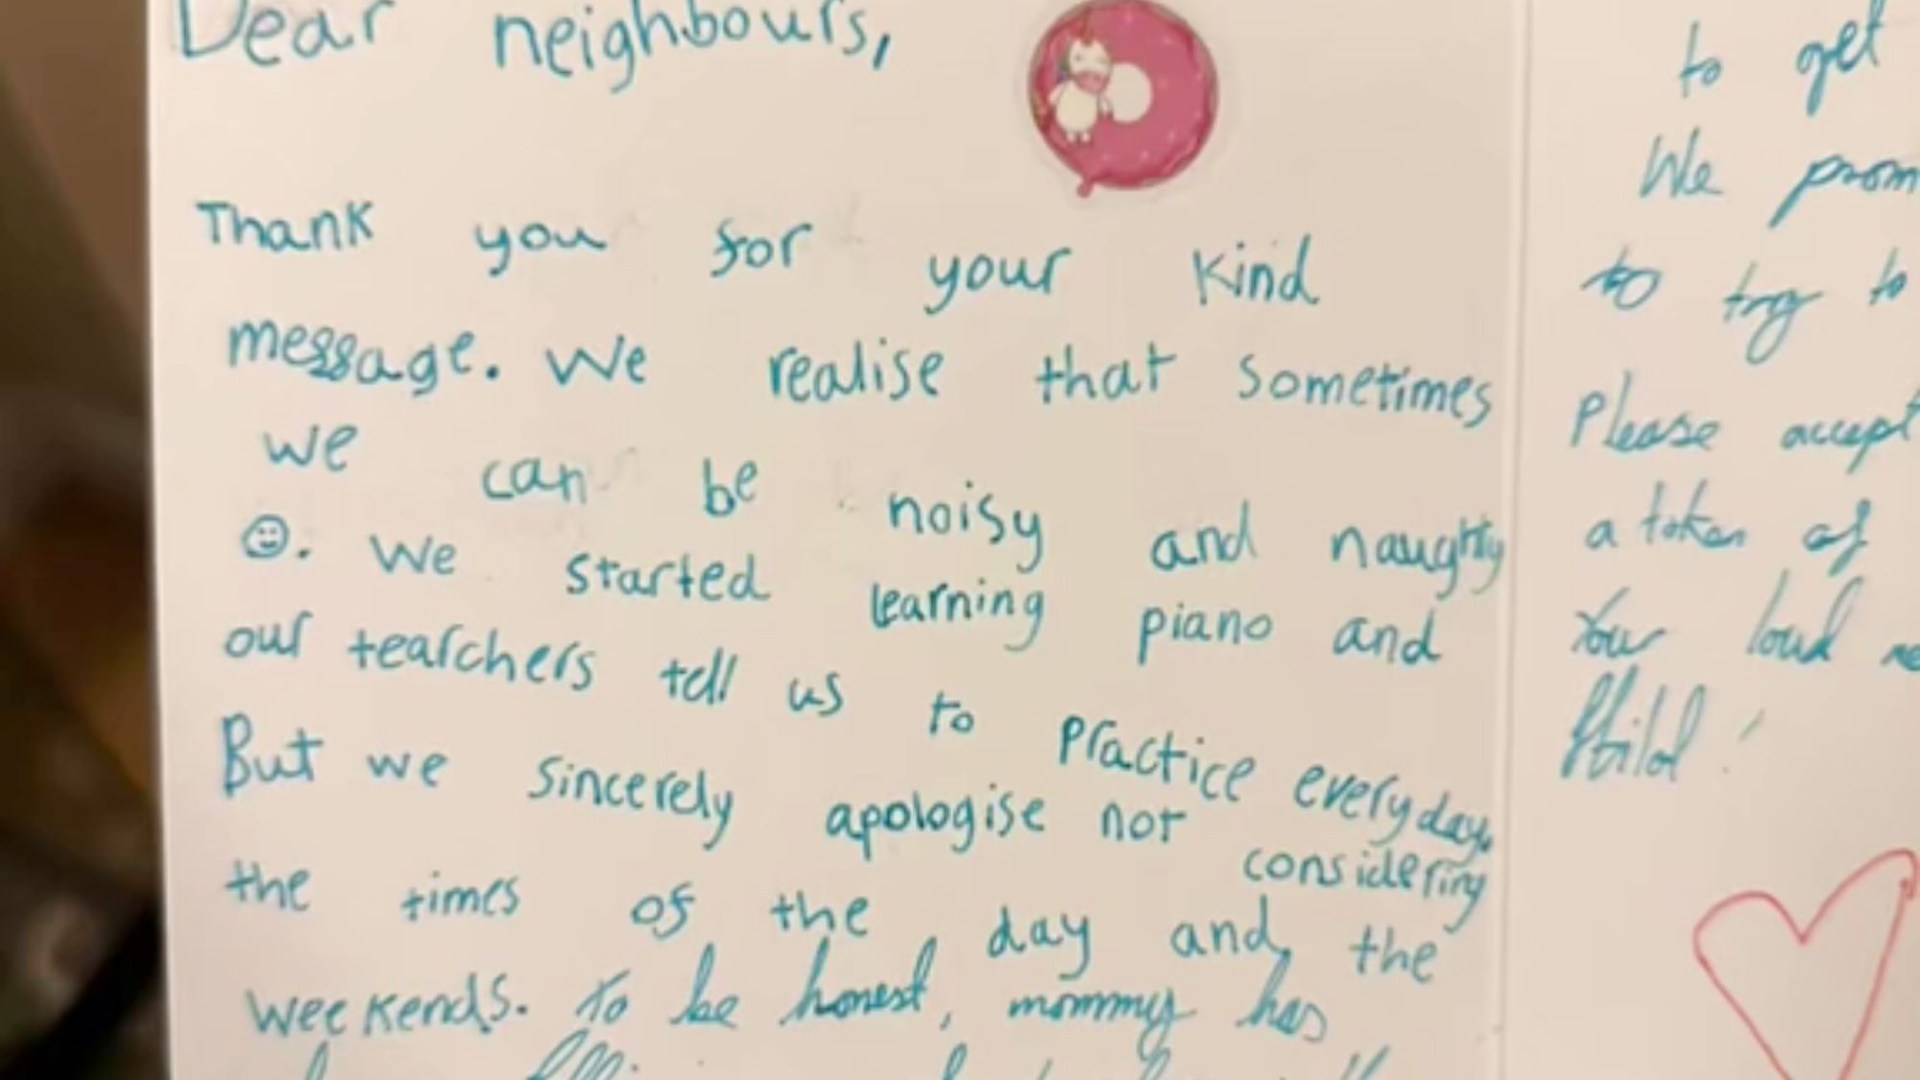 “Silencing our Noisy Neighbors: Their Heartbreaking Response to Our Complaint About Early Morning Piano Playing” #NoisyNeighbors #PianoComplaint #HeartbreakingResponse